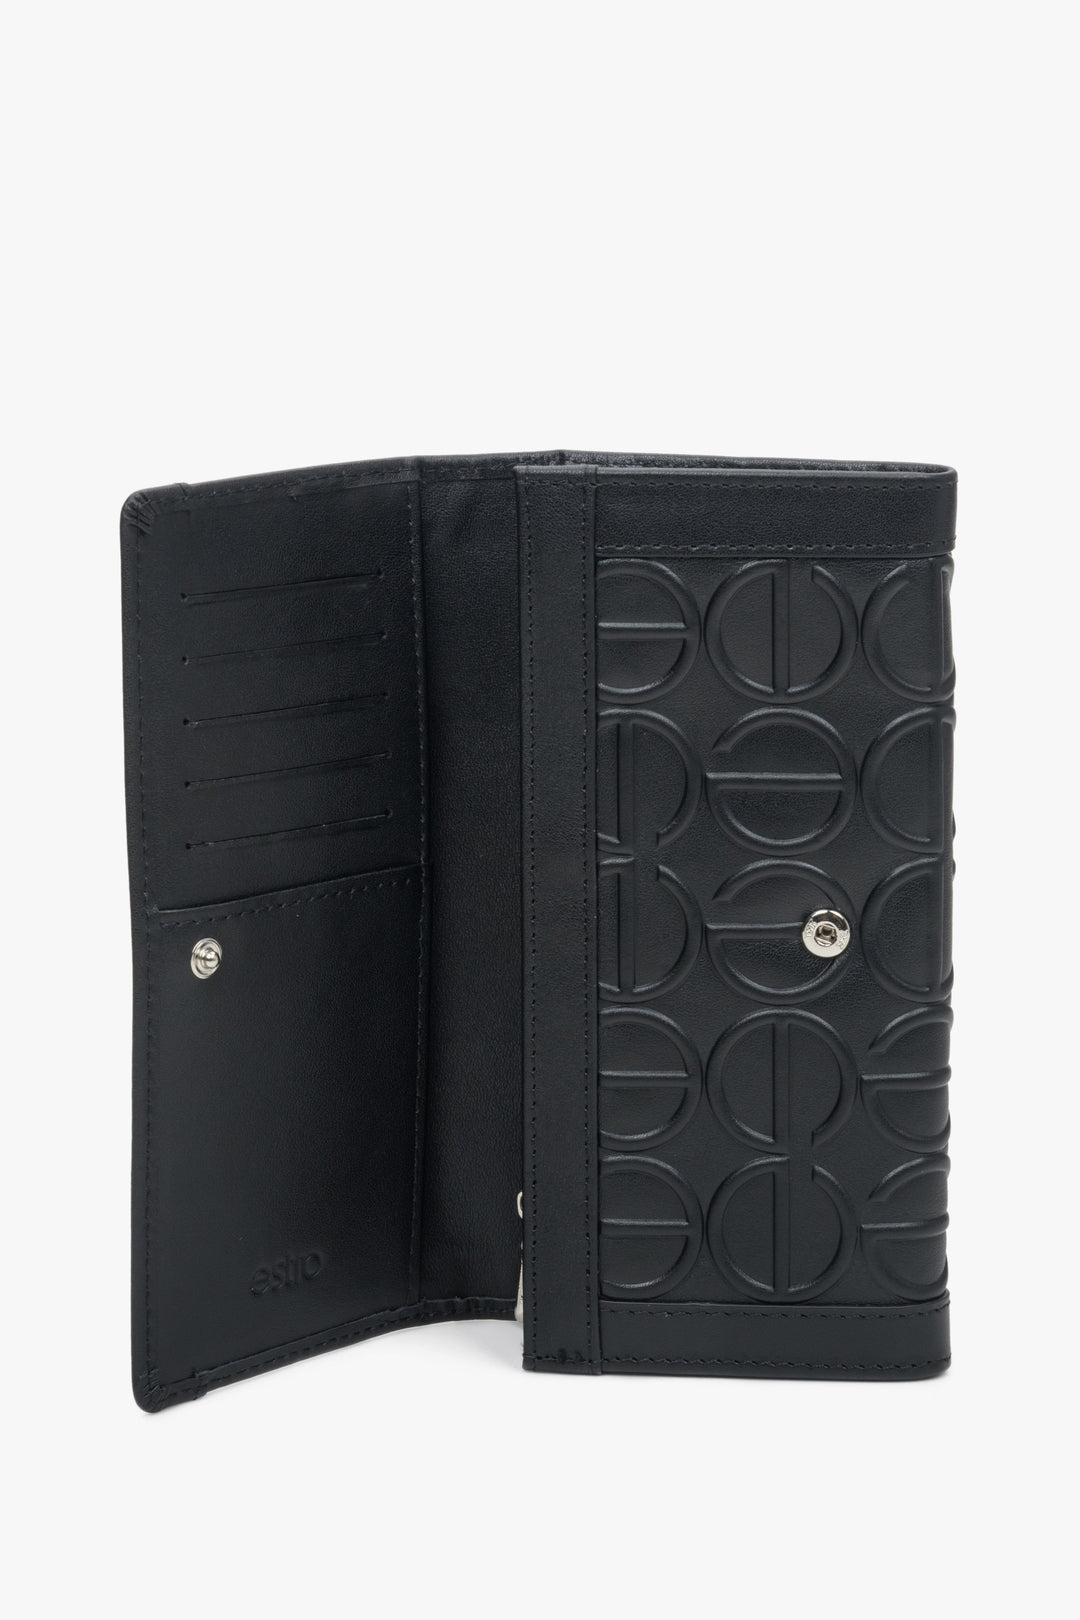 Women's black leather  Estro wallet - close-up on the interior.